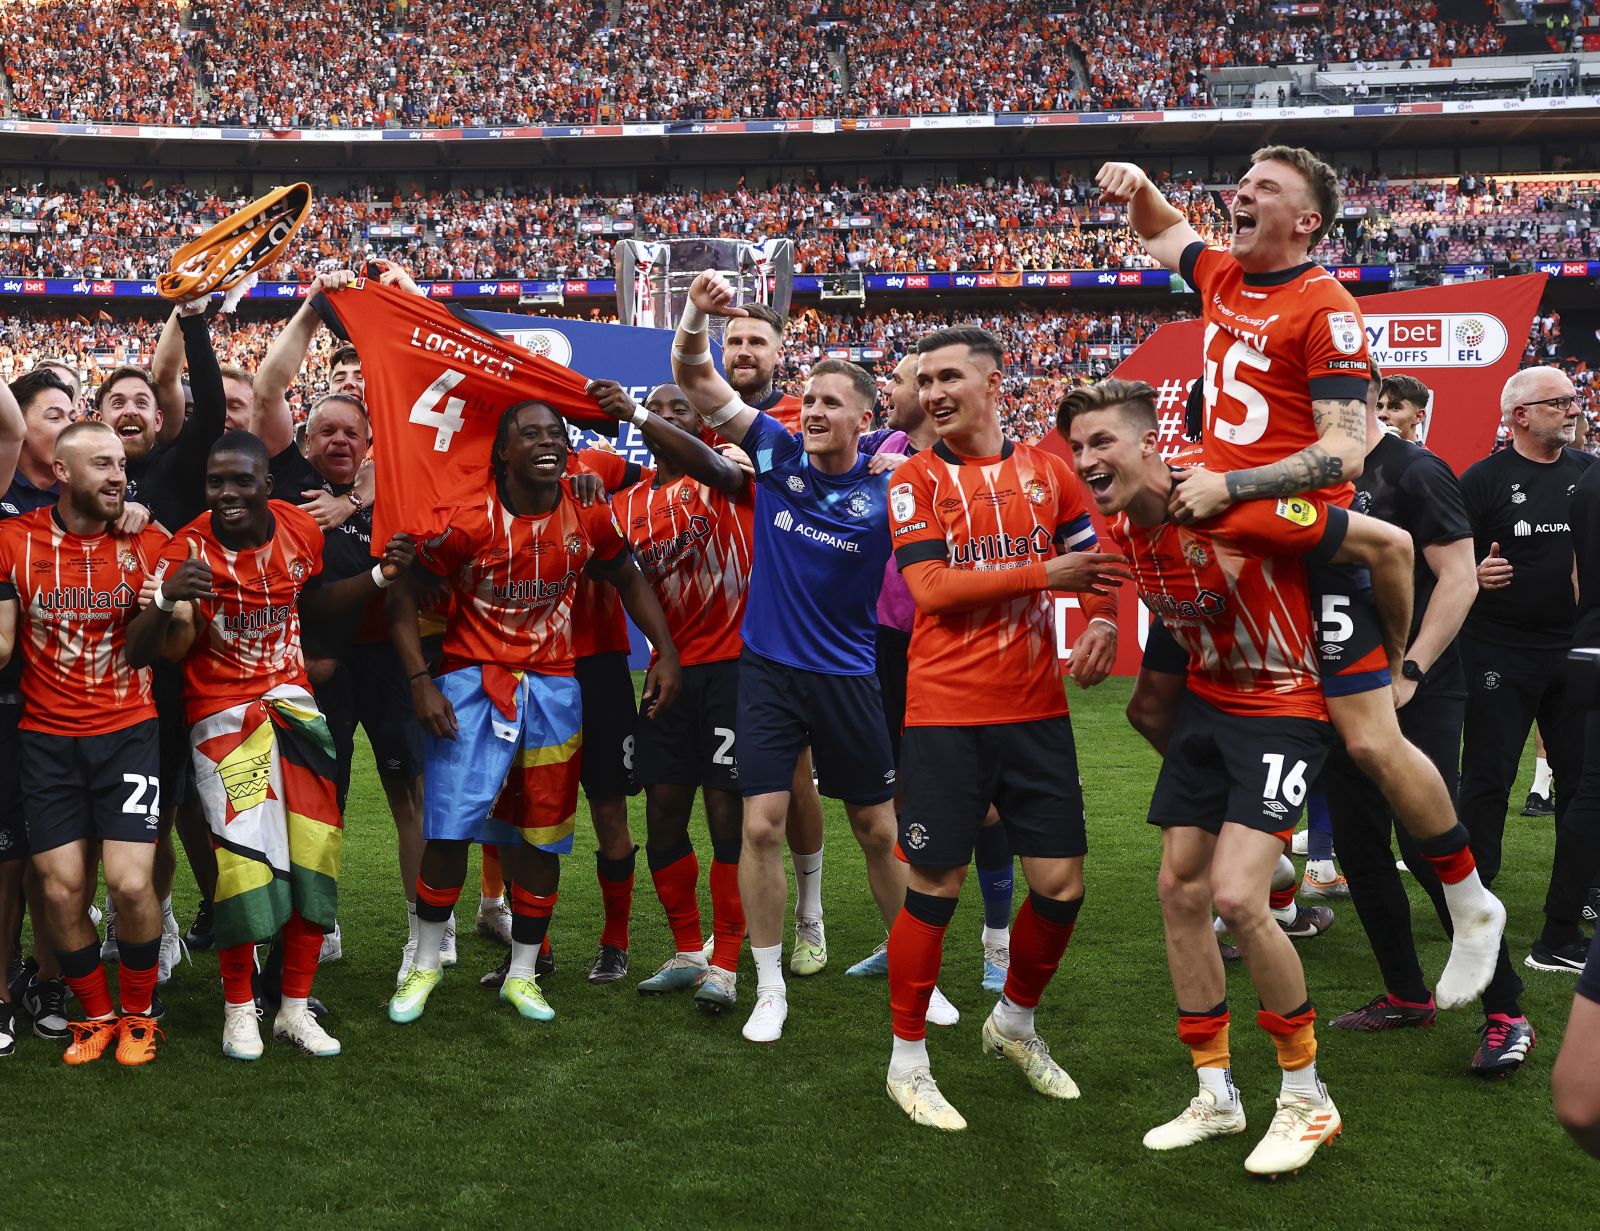 May 27, 2023, London: London, England, 27th May 2023. Luton's players celebrate at the final whistle during the Sky Bet Championship match at Wembley Stadium, London. (Credit Image: Â© David Klein/Sportimage/Cal Sport Media) (Cal Sport Media via AP Images)